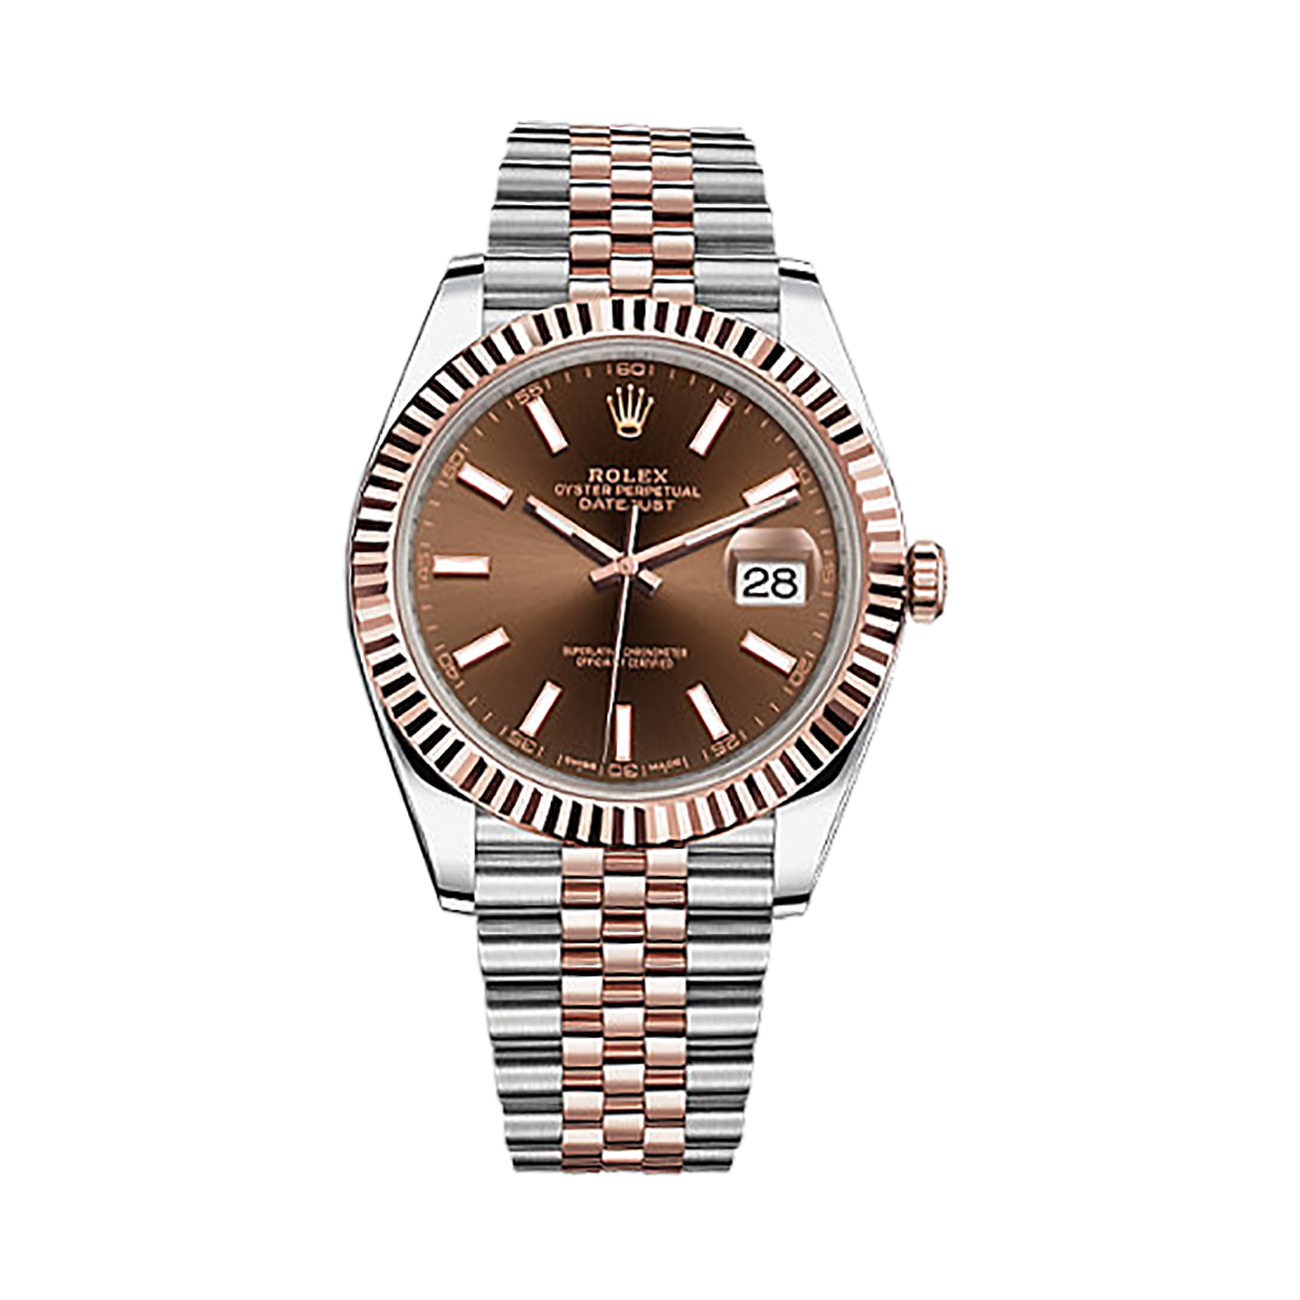 Datejust 41 126331 Rose Gold & Stainless Steel Watch (Chocolate) - Click Image to Close